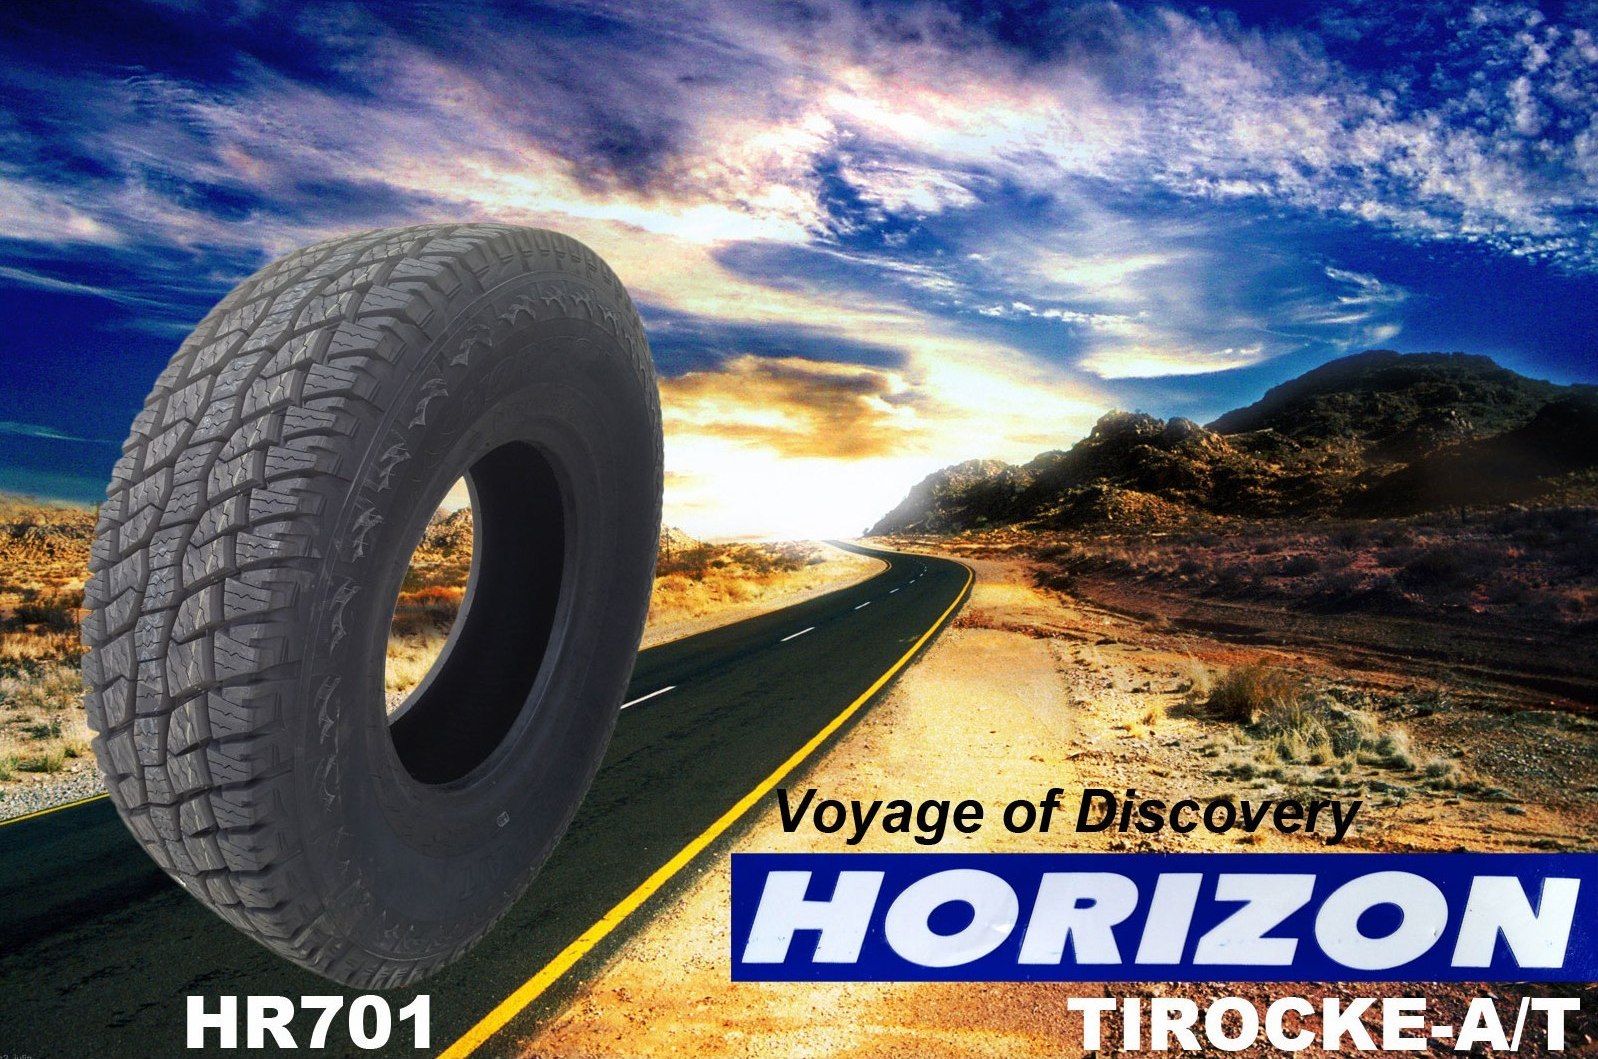 HORIZON HR701 Series - Voyage of Discovery